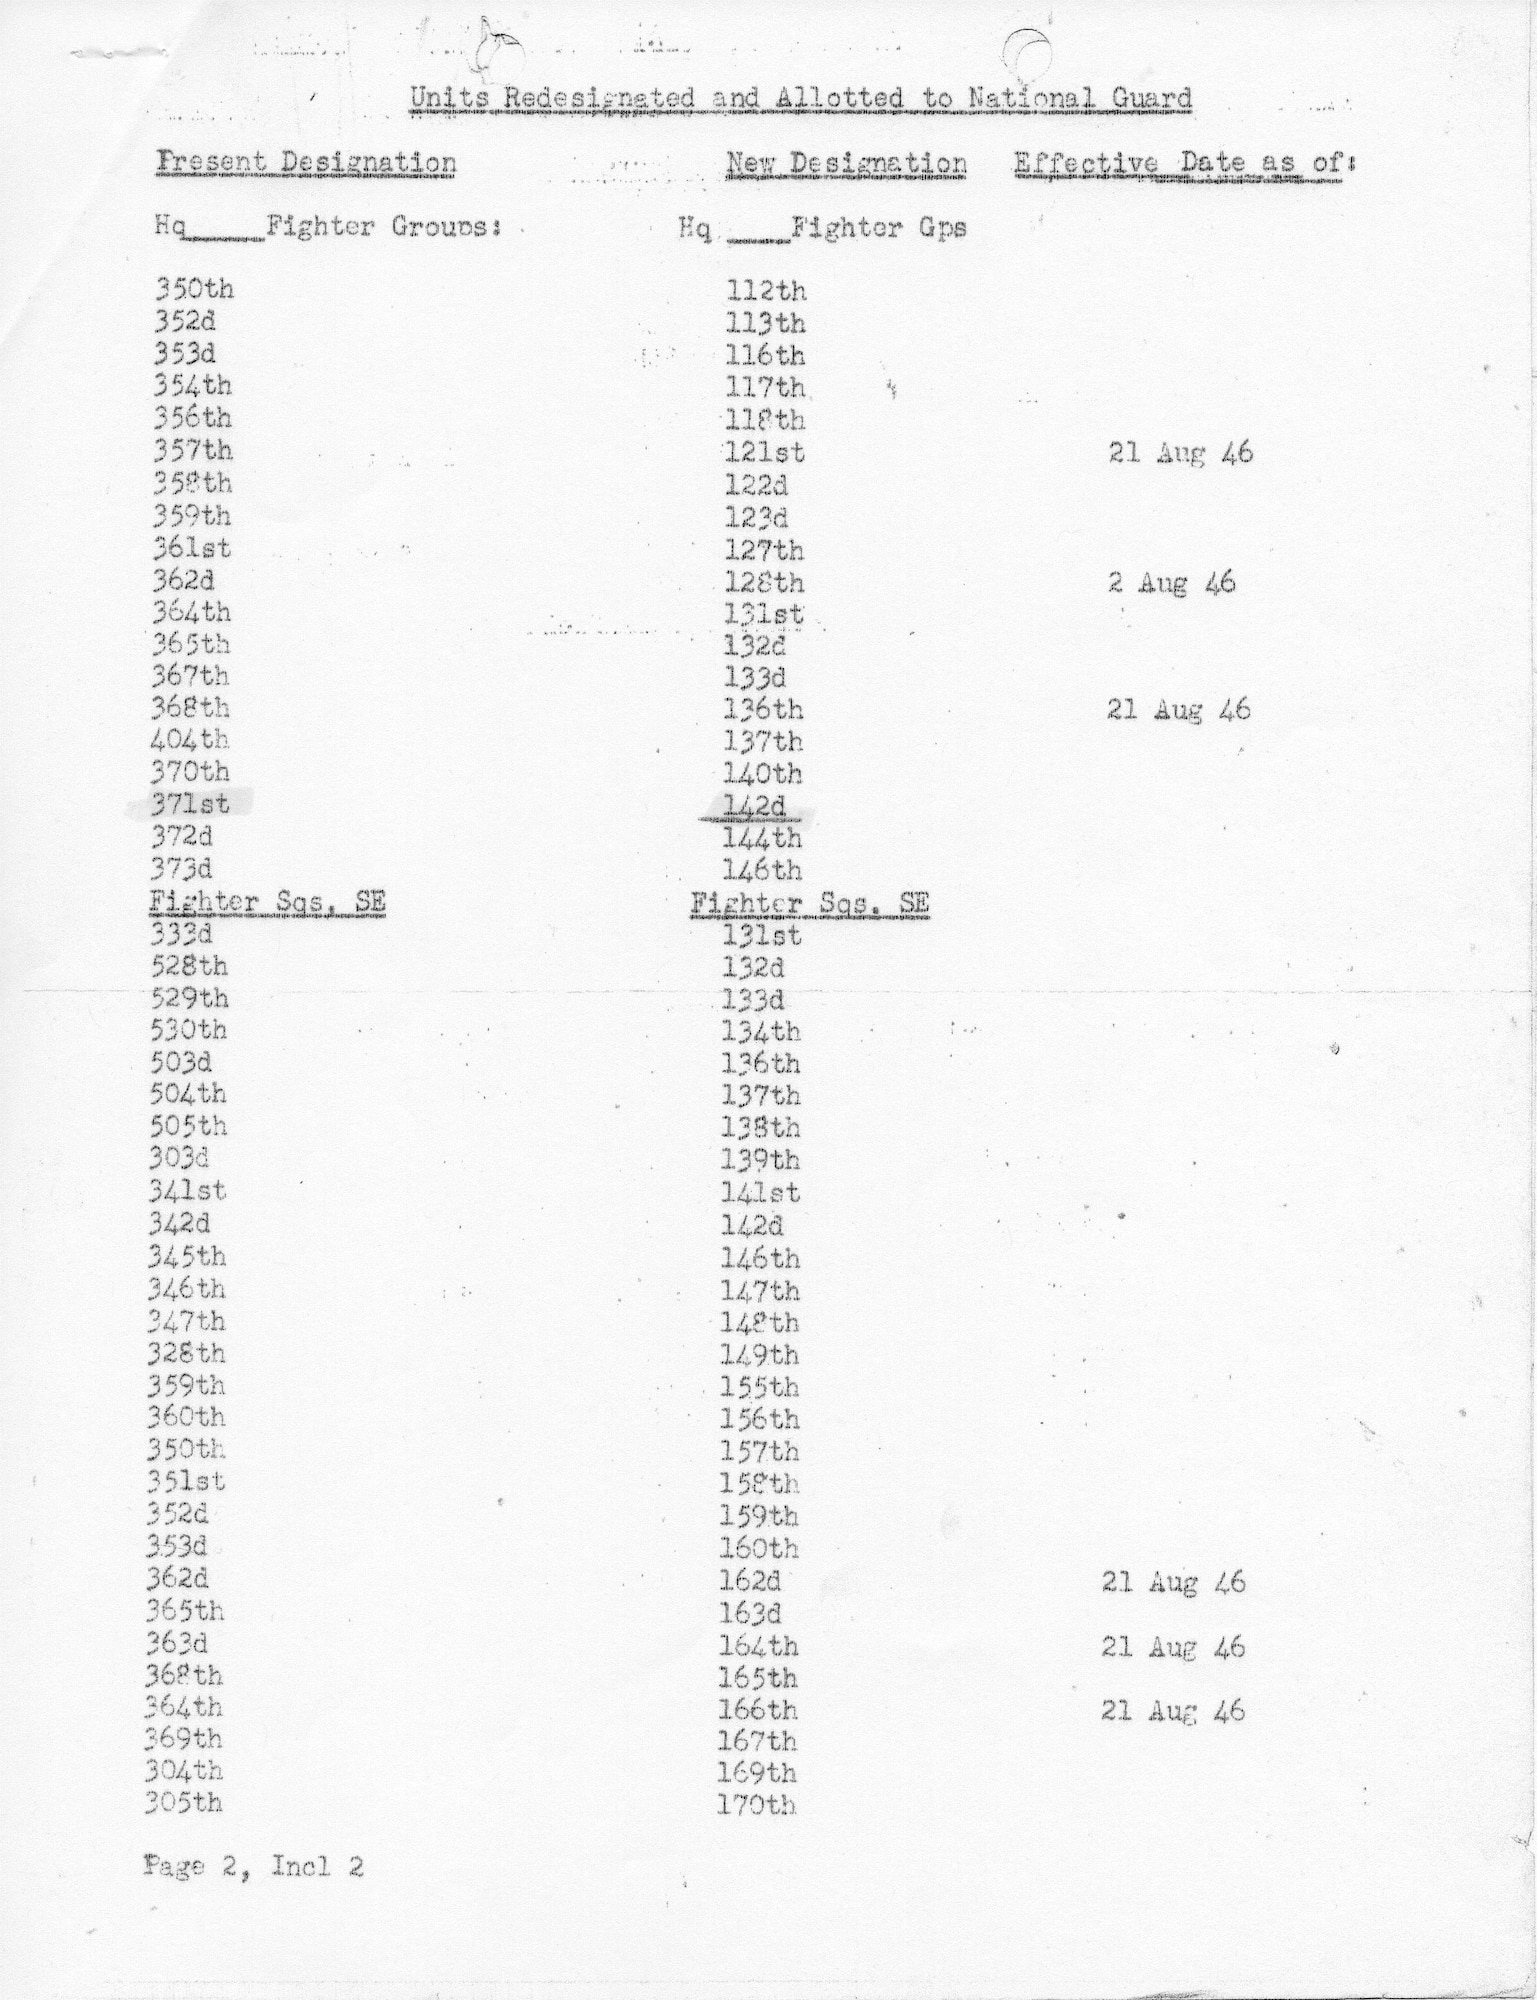 Inclosure 2 of the 5 December 1946 War Department directive listed the units which were redesignated and allotted to the National Guard, effective as of 24 May 1946.  Page 2 of Inclosure 2 shows the relationship between the 371st Fighter Group and the 142nd Fighter Group.  (142FW History Archives)